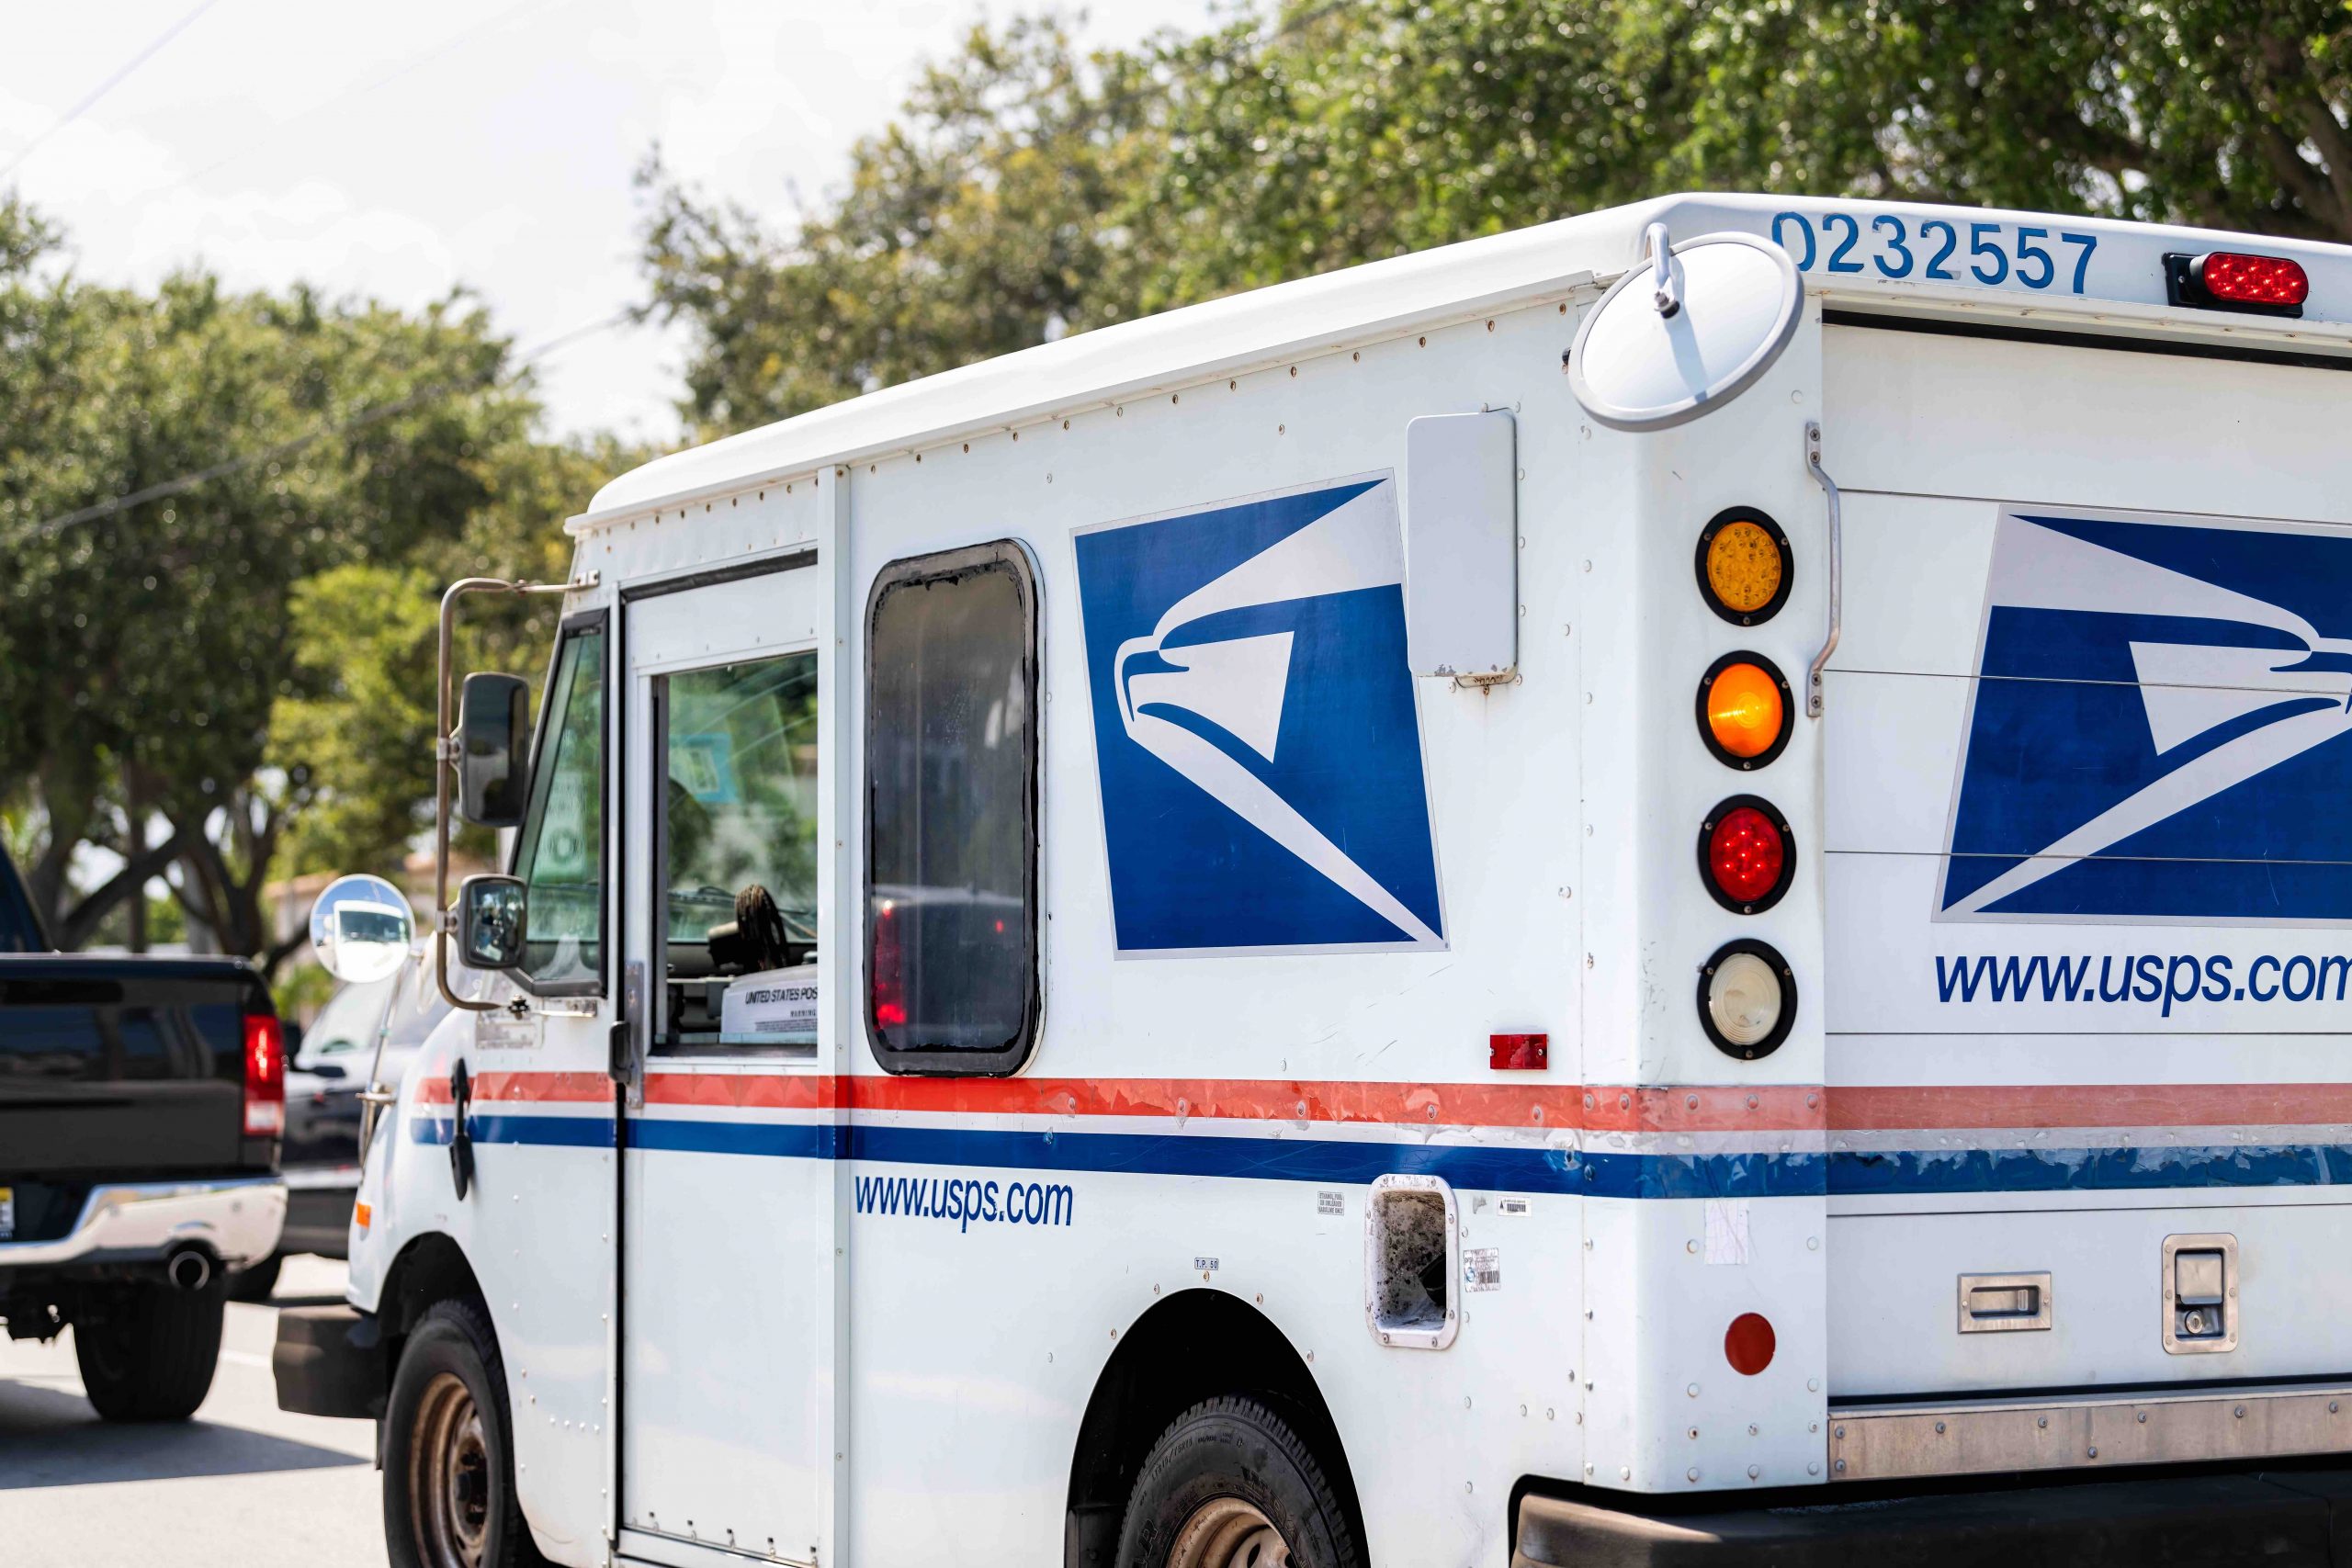 Round for glory – USPS Employee News